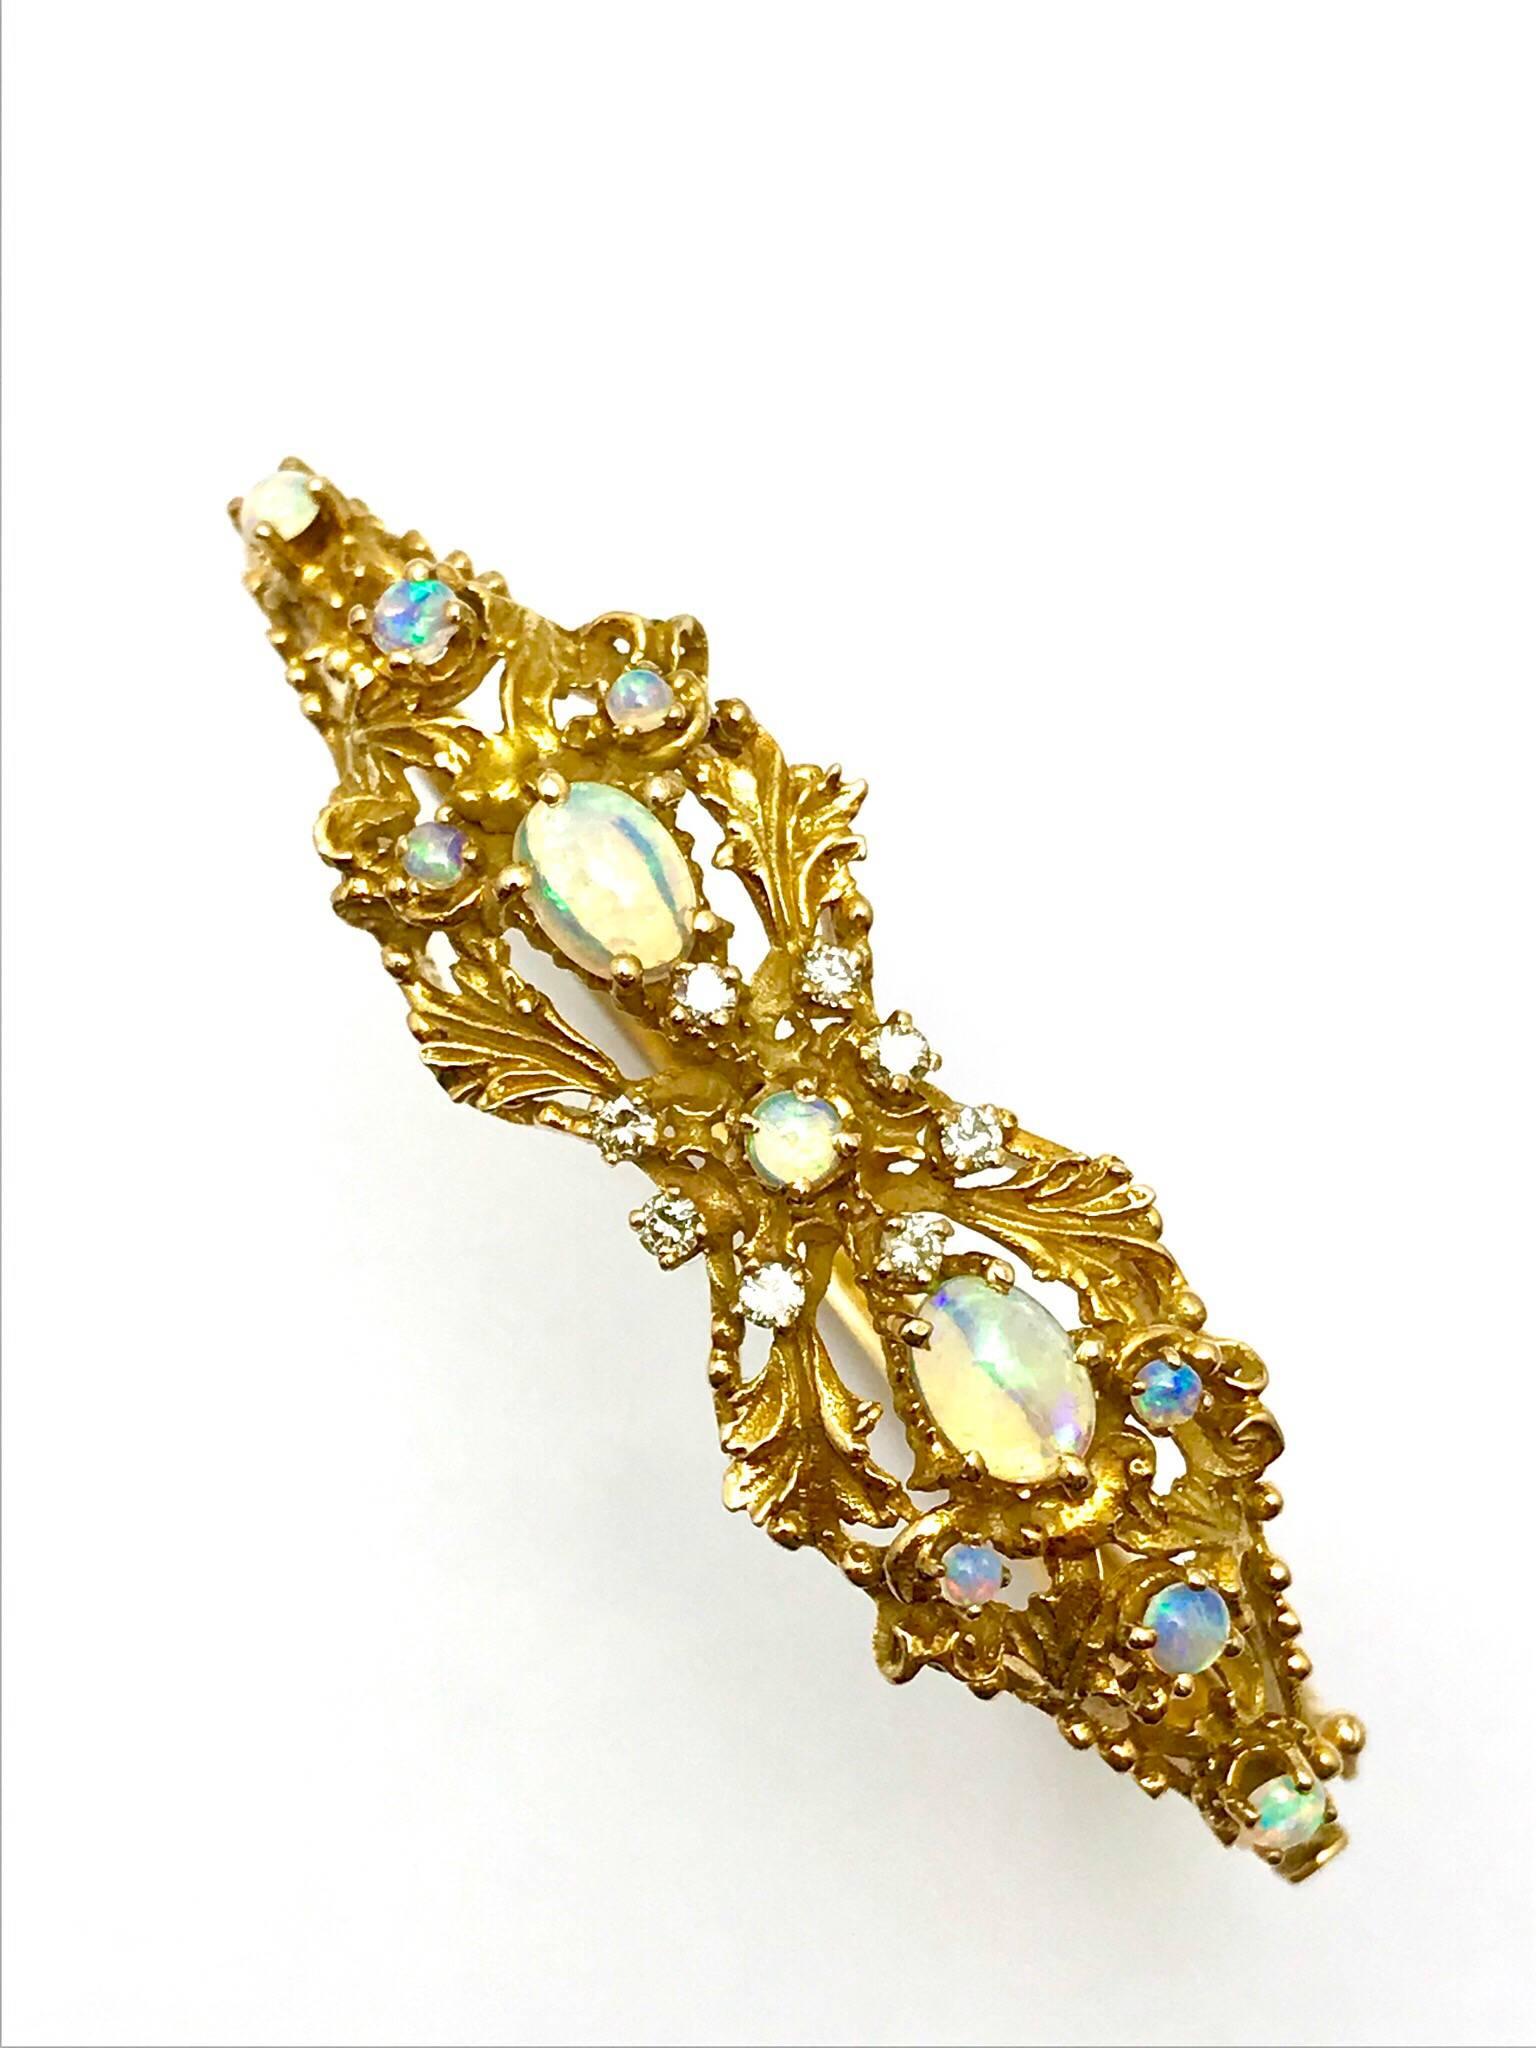 An opal and diamond 14 karat yellow gold bangle bracelet.  The bracelet is hand crafted with eight diamond surrounding the center opal, and five more opals on both sides, set in a detailed foliage design.  The bangle has a hinge and clasp.  Signed